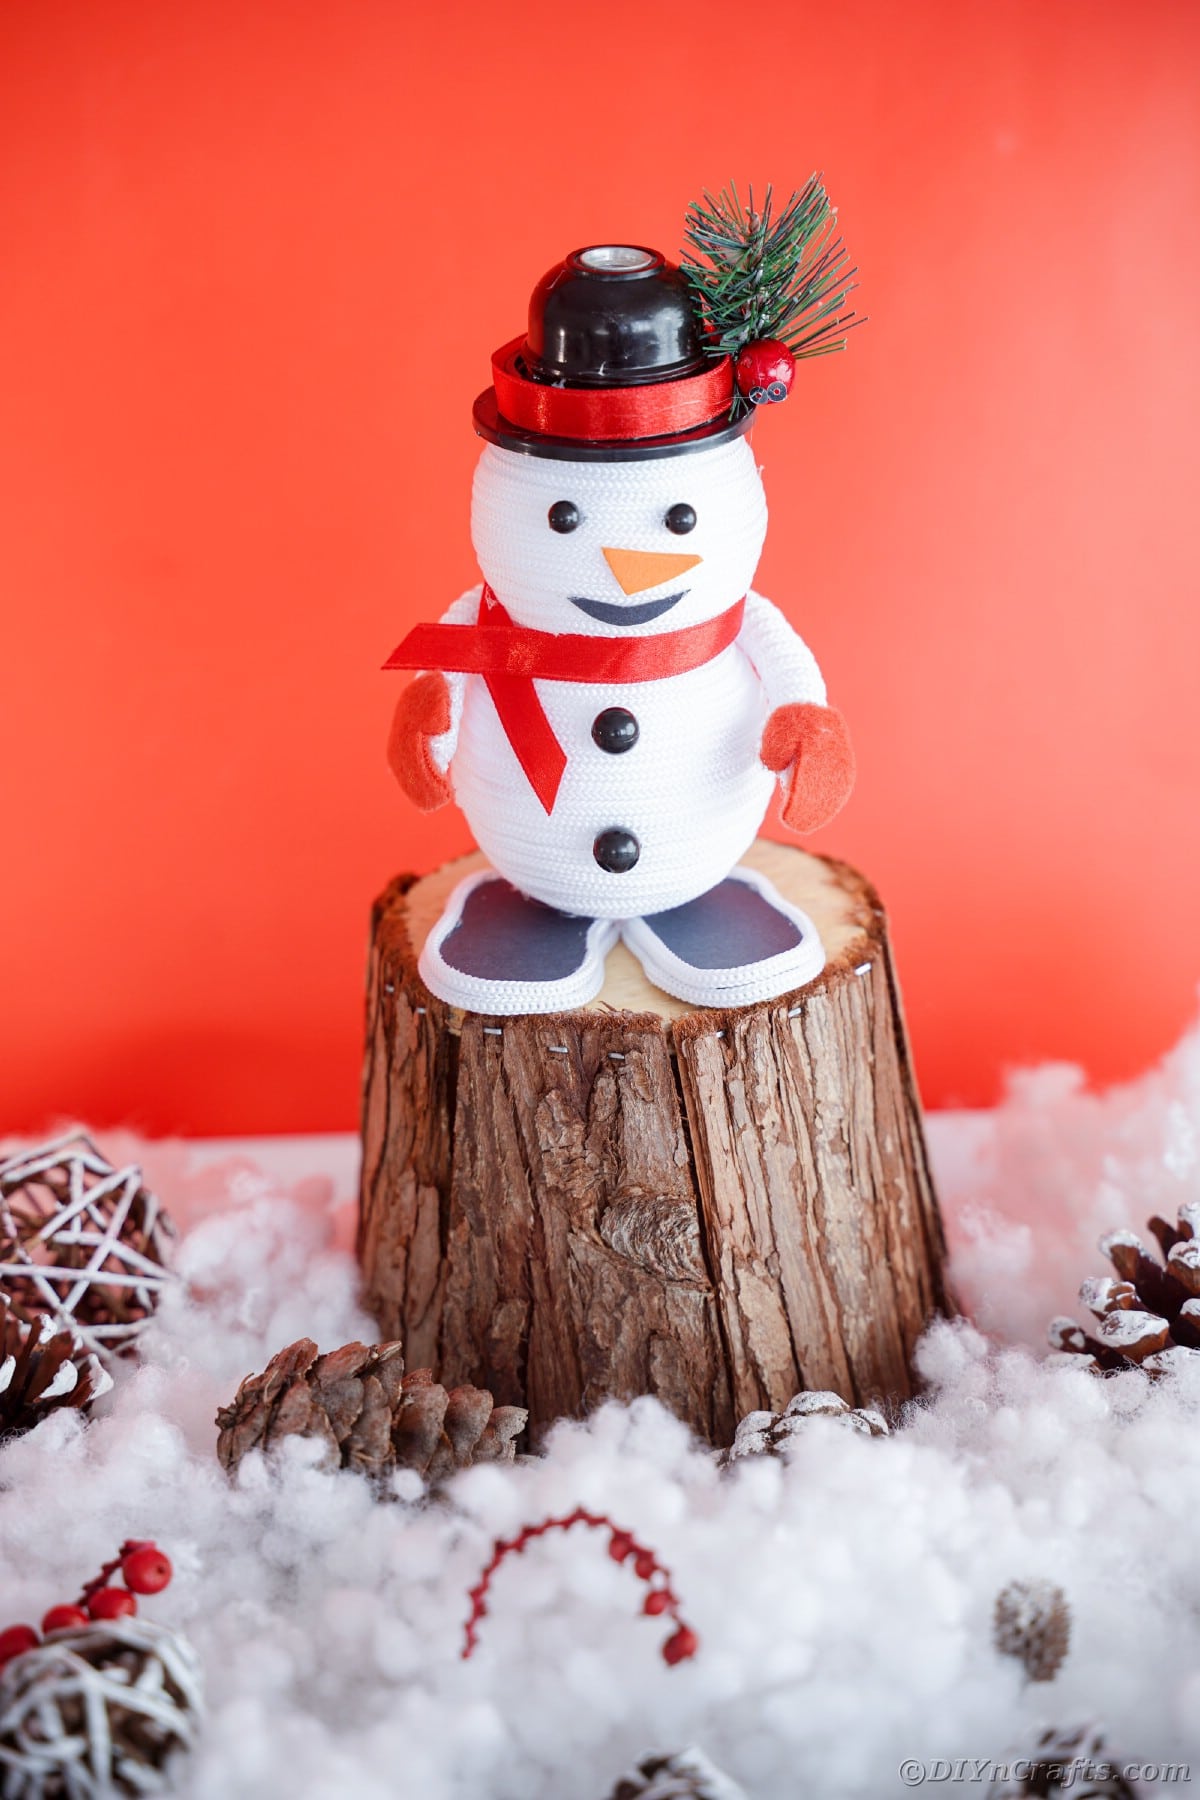 stump on fake snow with red background holding mini snowman